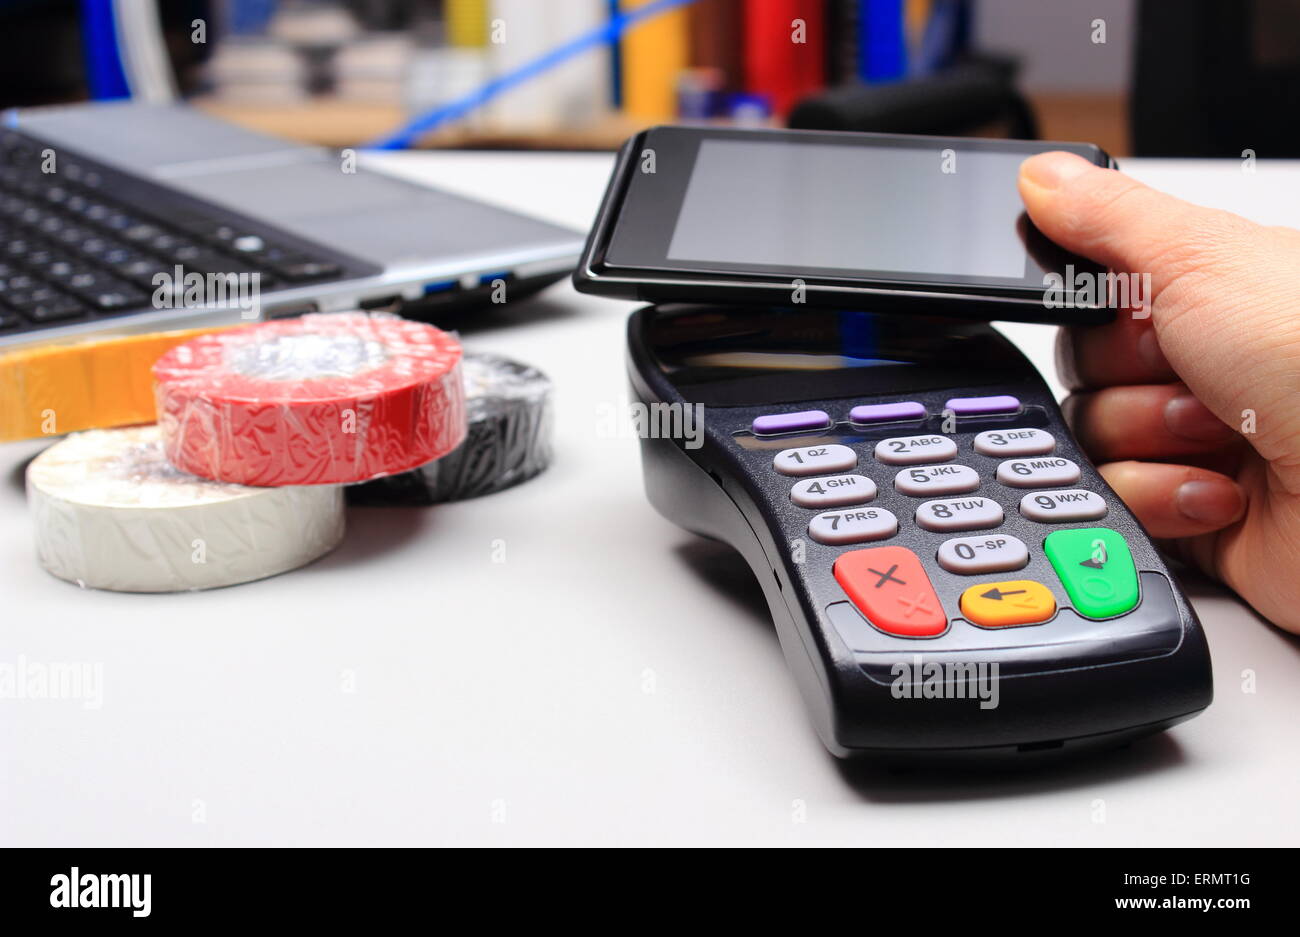 Hand of woman paying with NFC technology on mobile phone in an electrical shop, credit card reader, payment terminal, Stock Photo